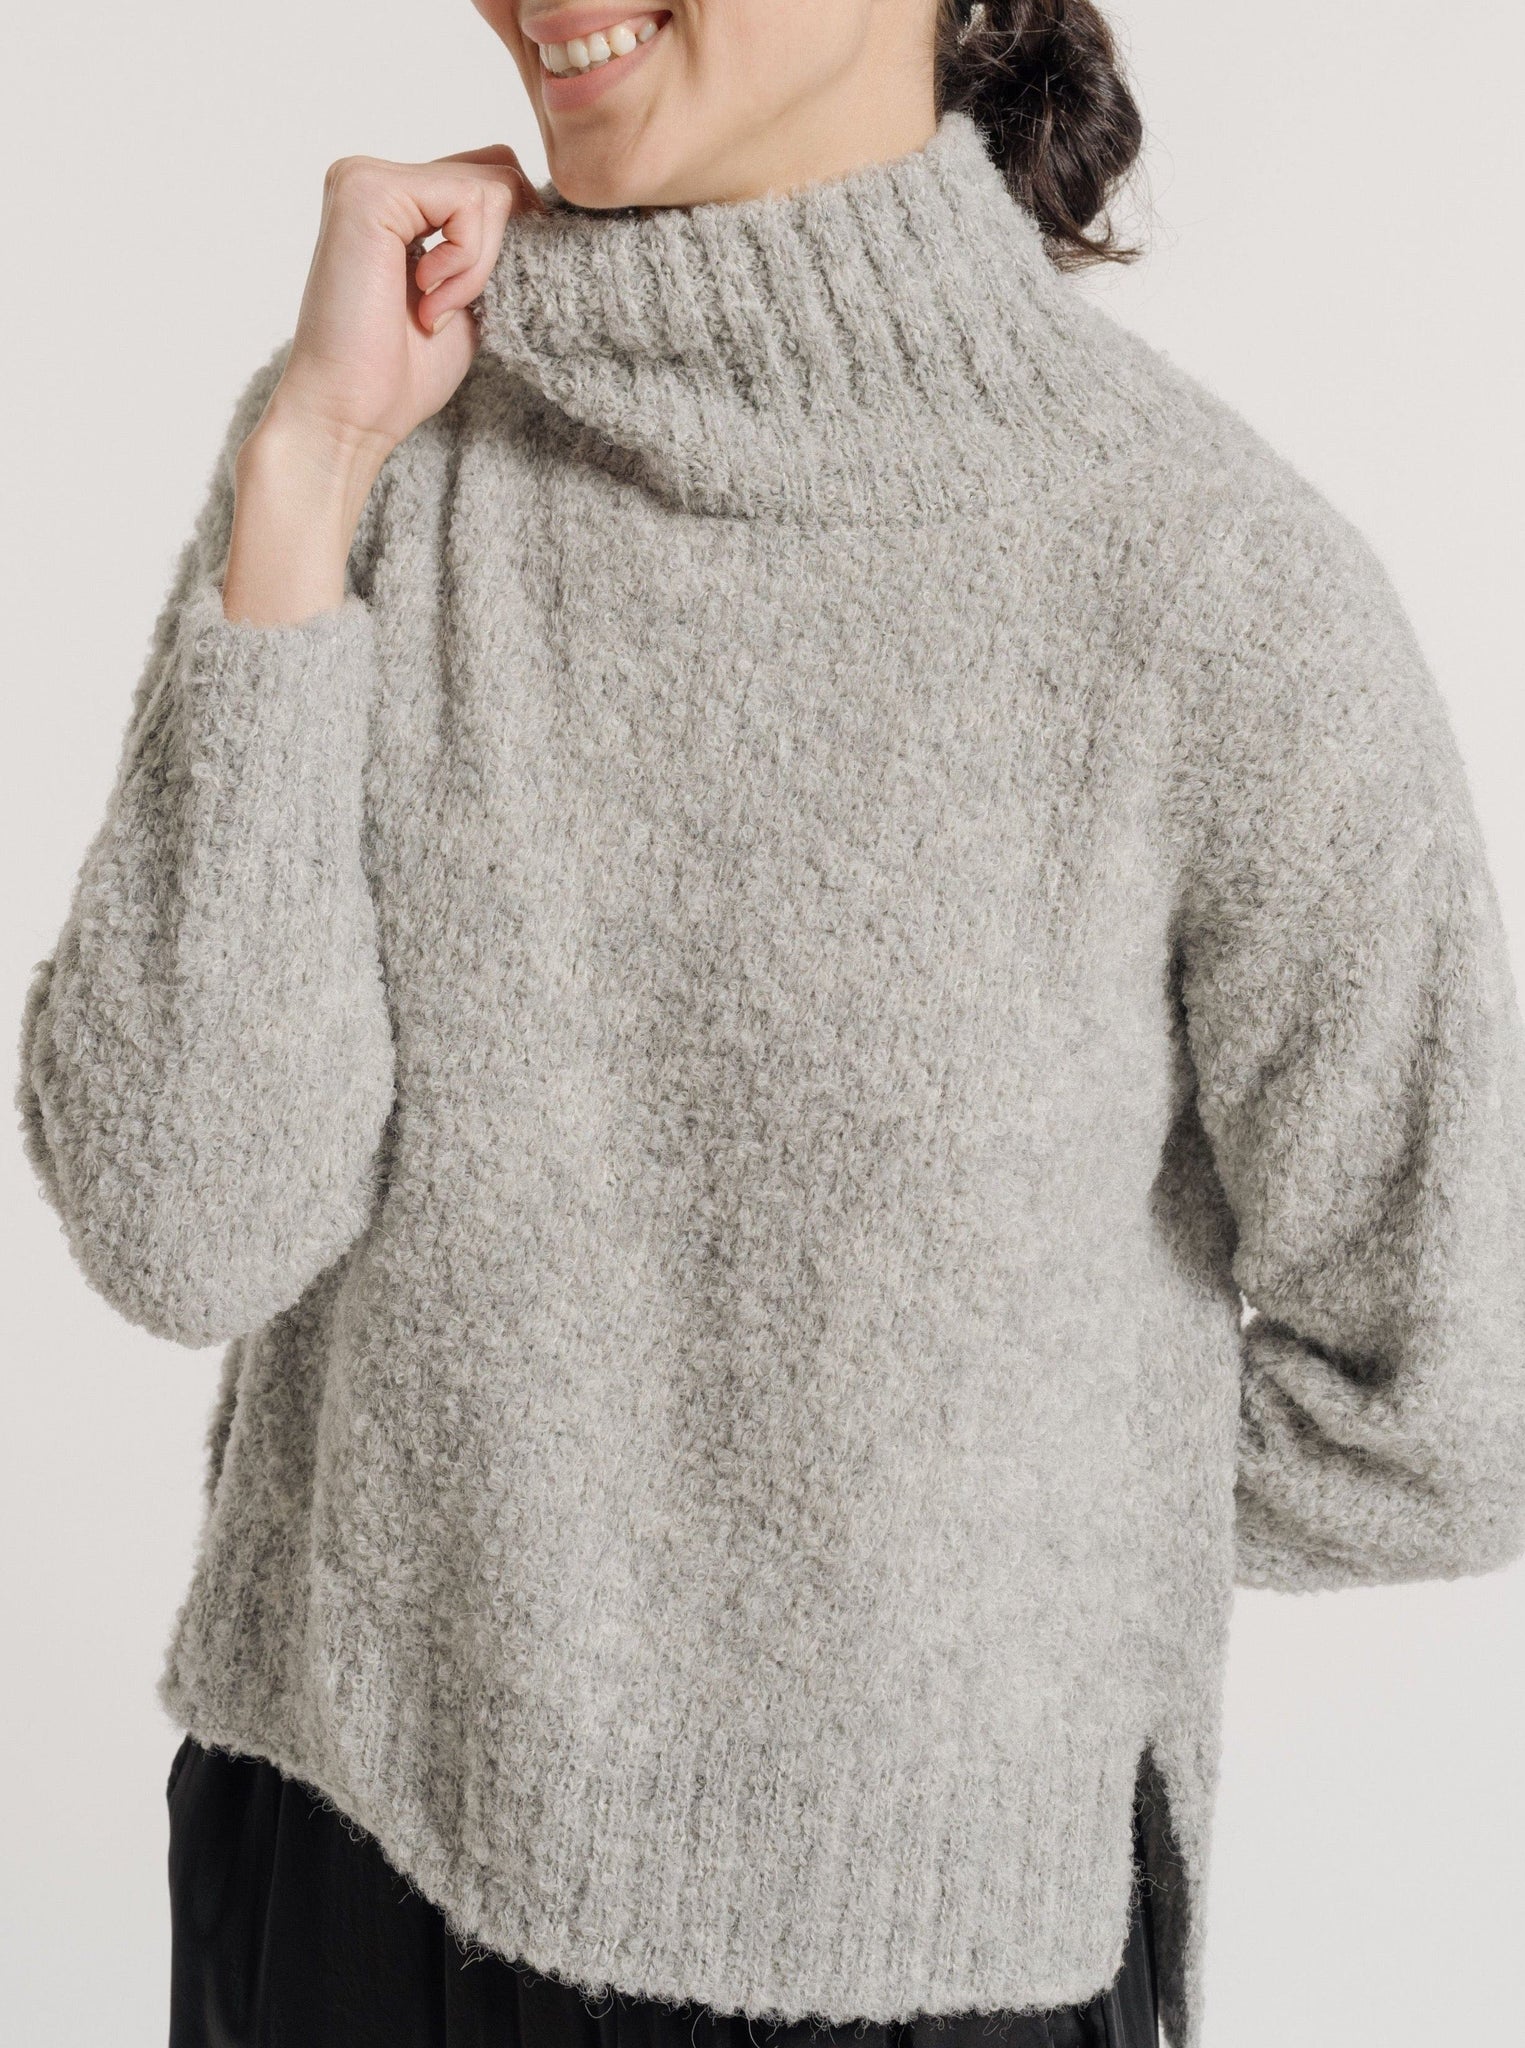 Basket Weave Sweater - Natural by Donna Wilson. 100% lambswool.